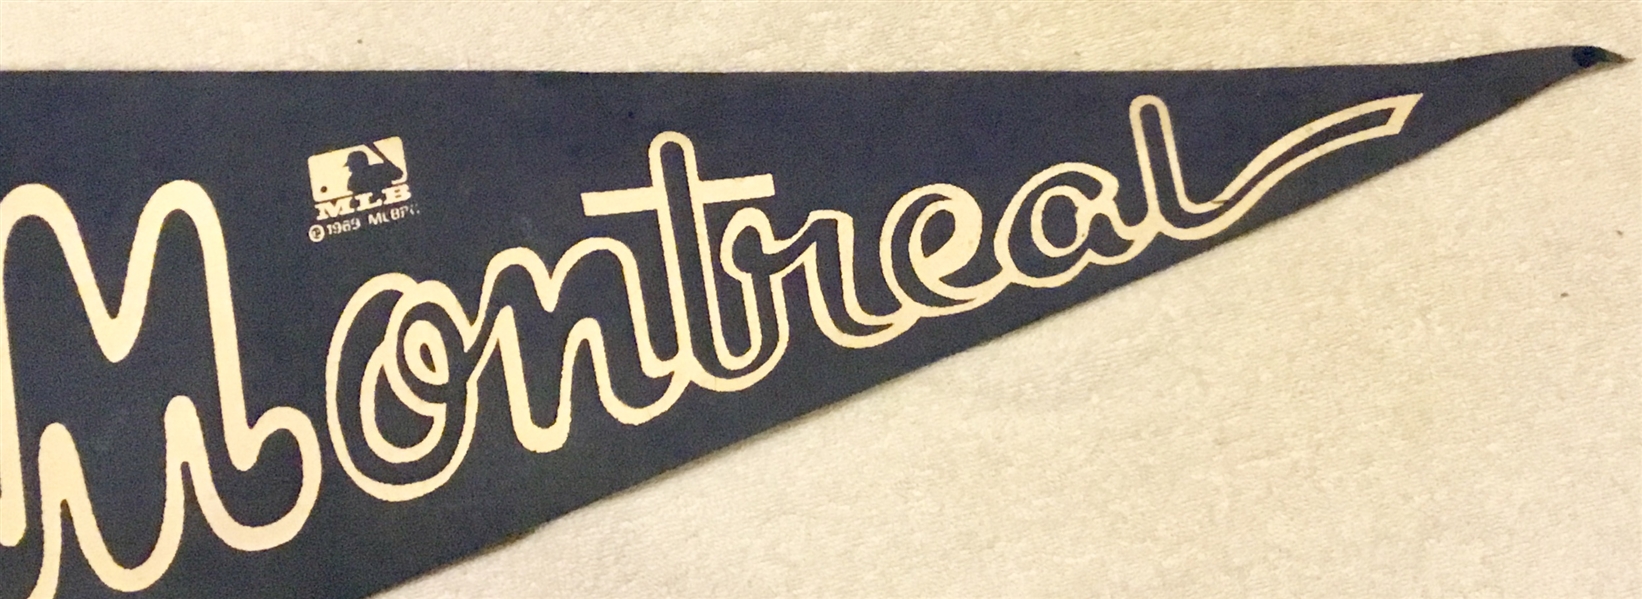 1969 MONTREAL EXPOS PENNANT - 1st YEAR OF FRANCHISE